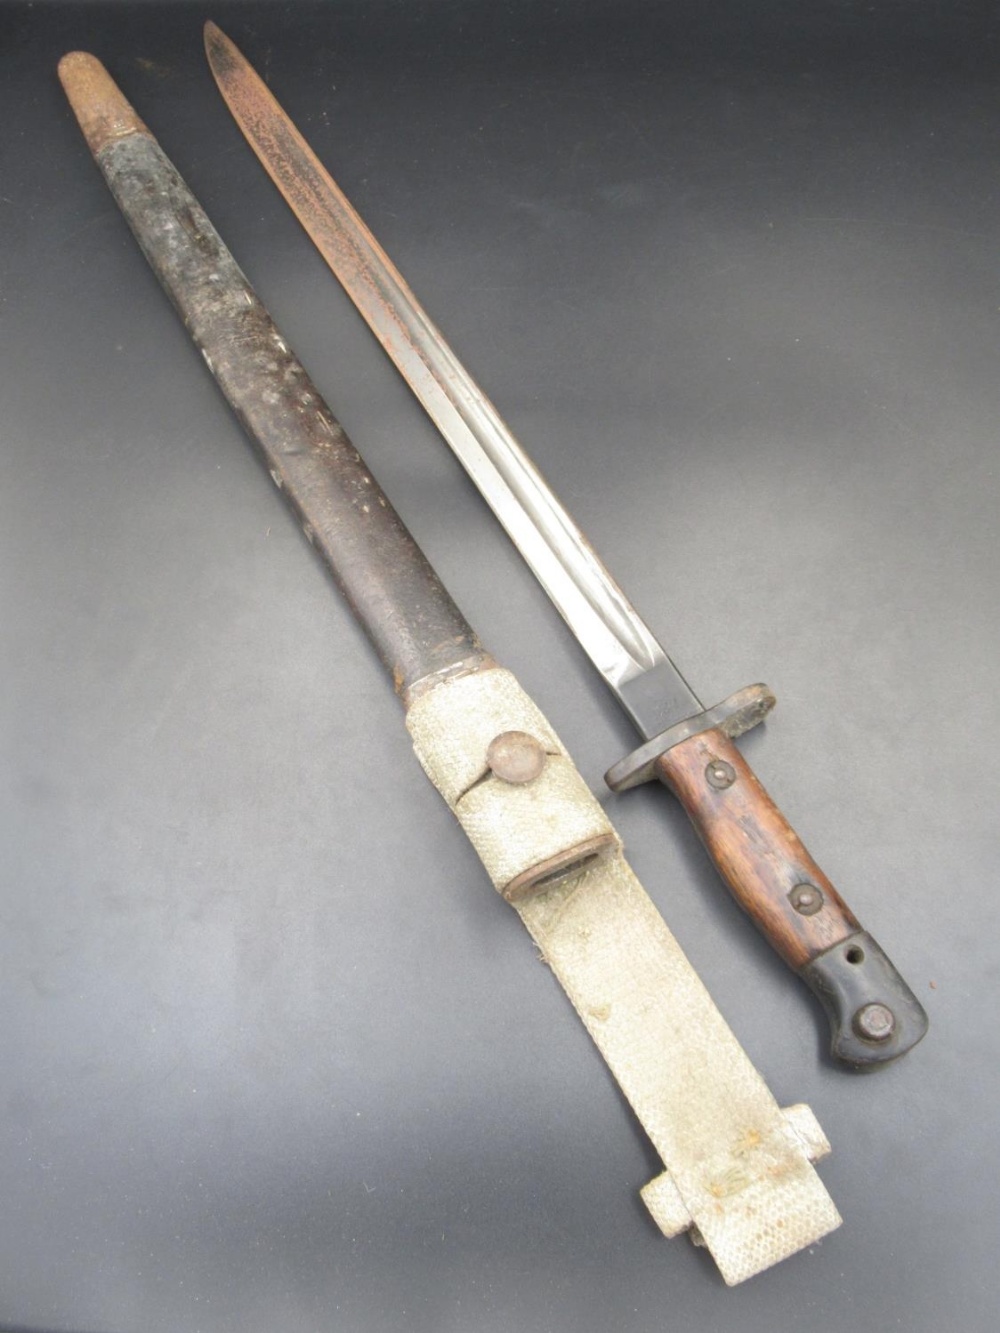 British 1907 pattern bayonet, manufactured by Vickers. Complete with original scabbard and canvas